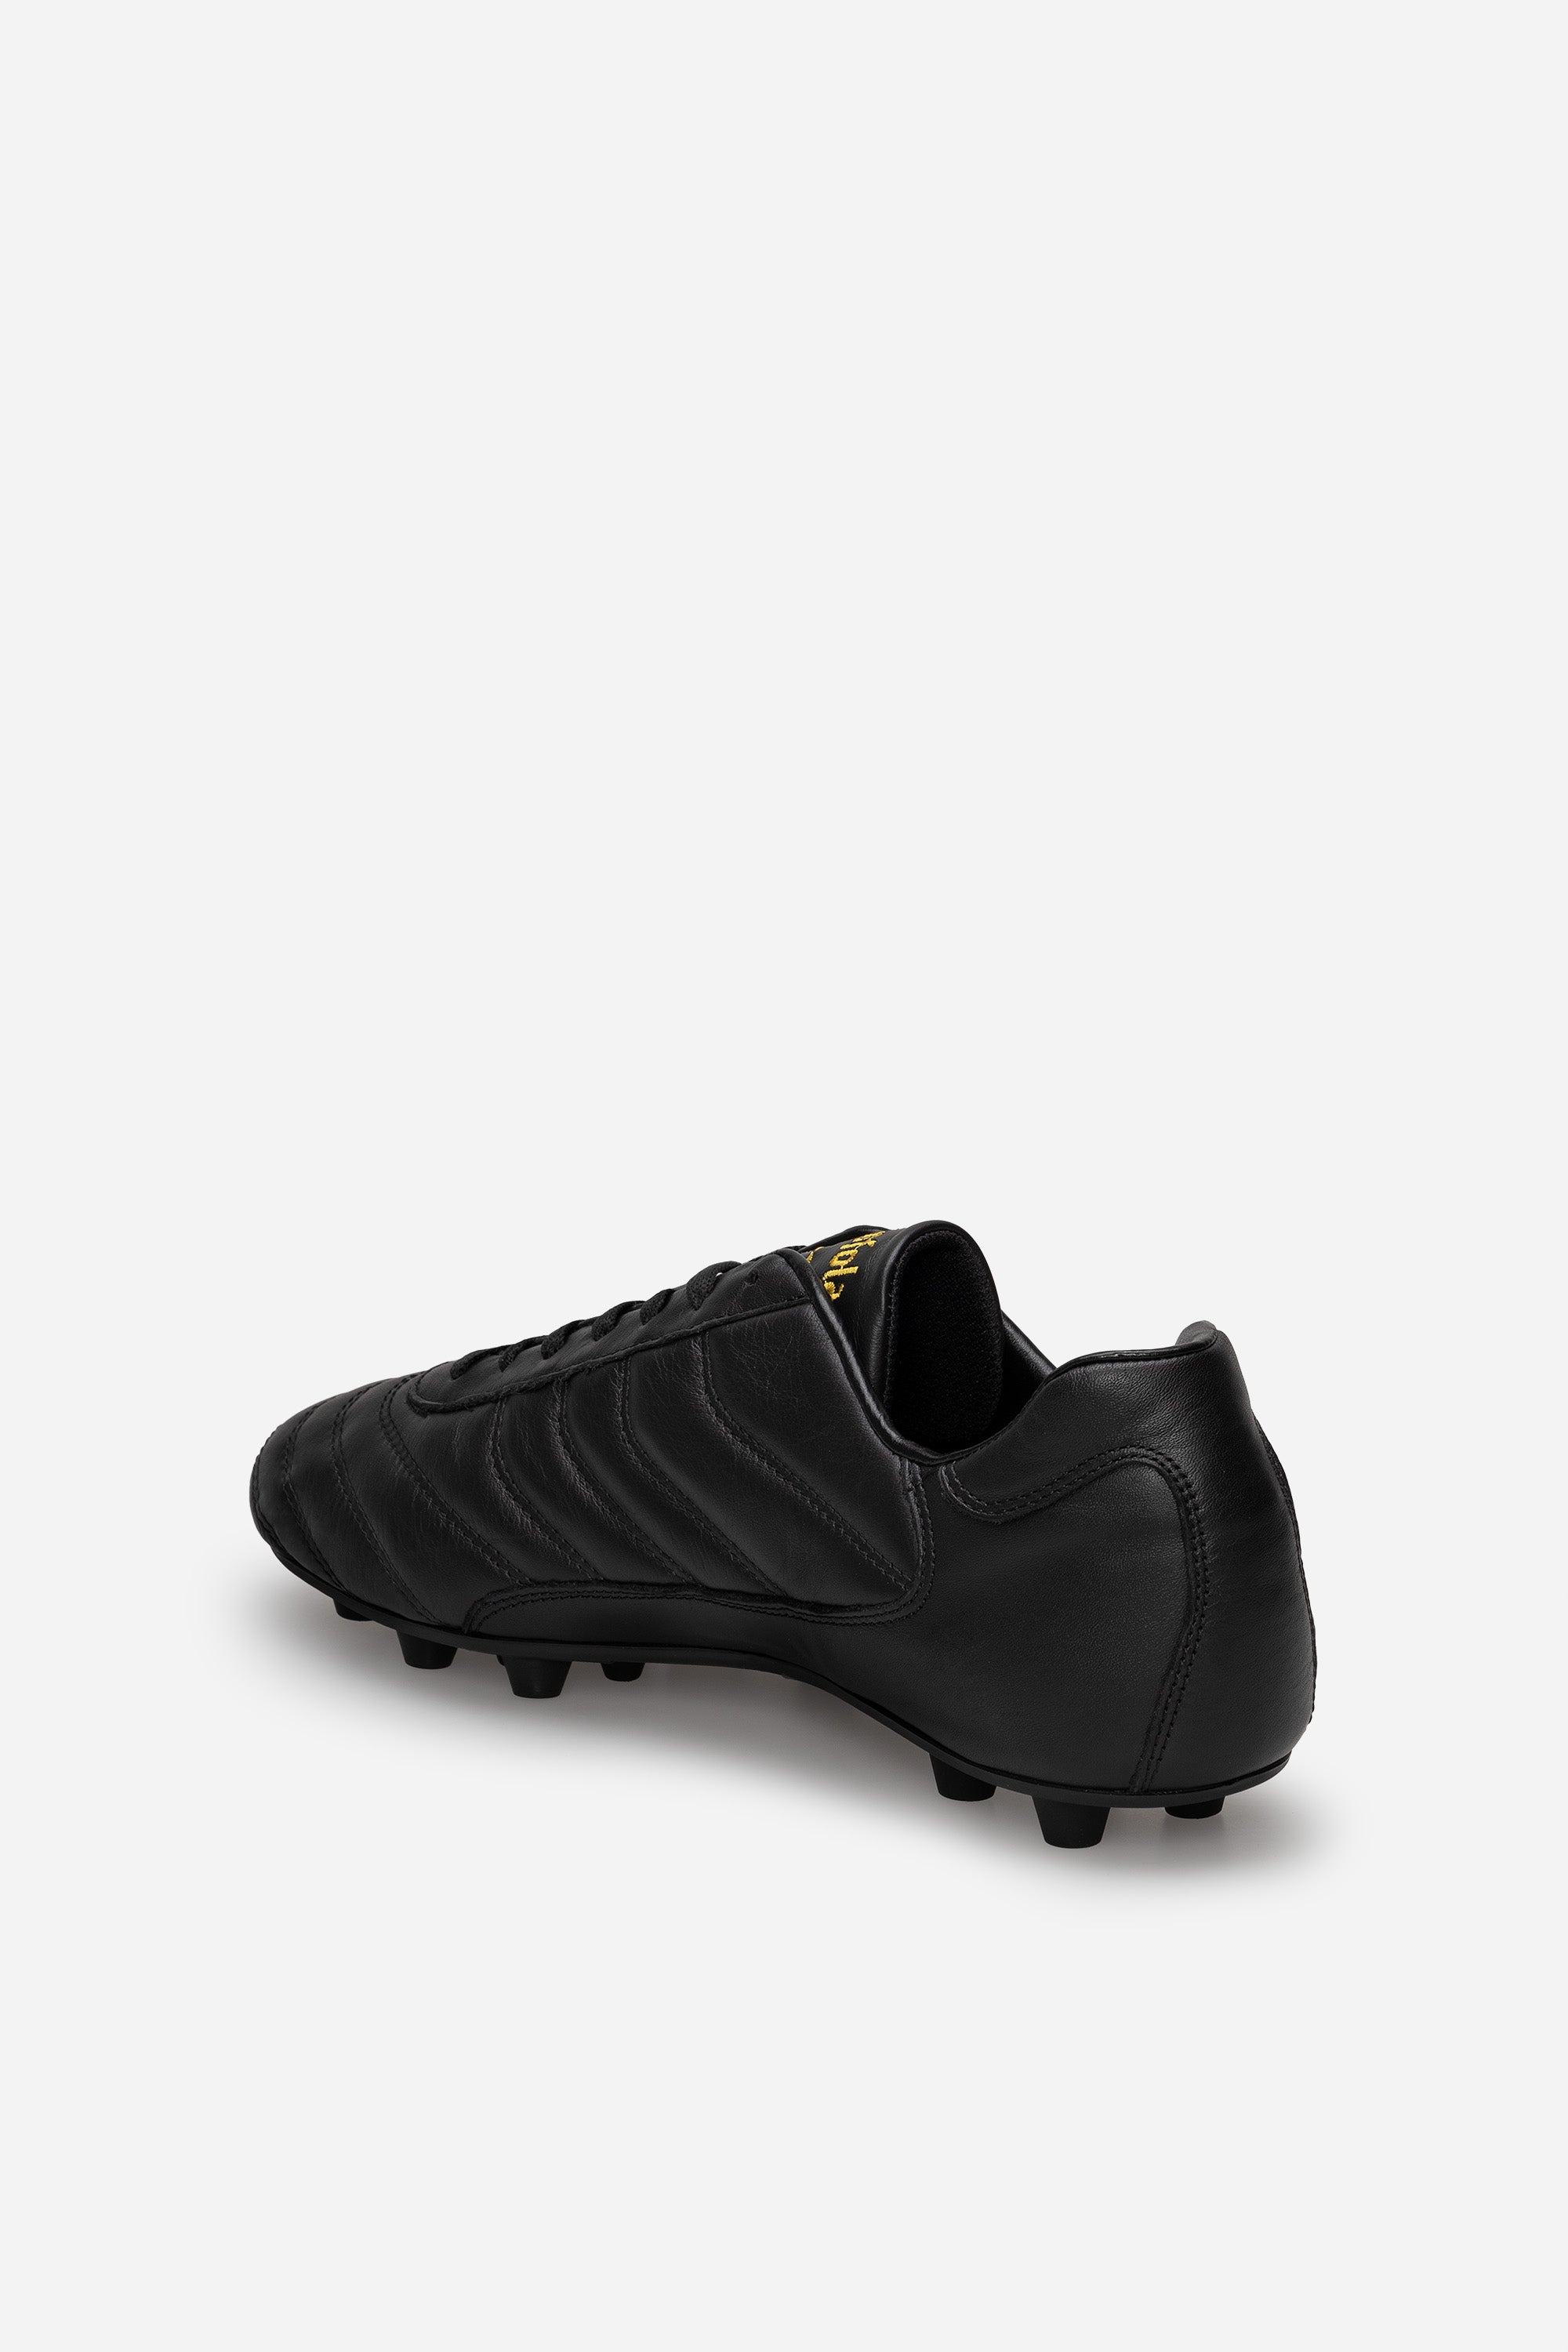 Derby Leather Football Boots